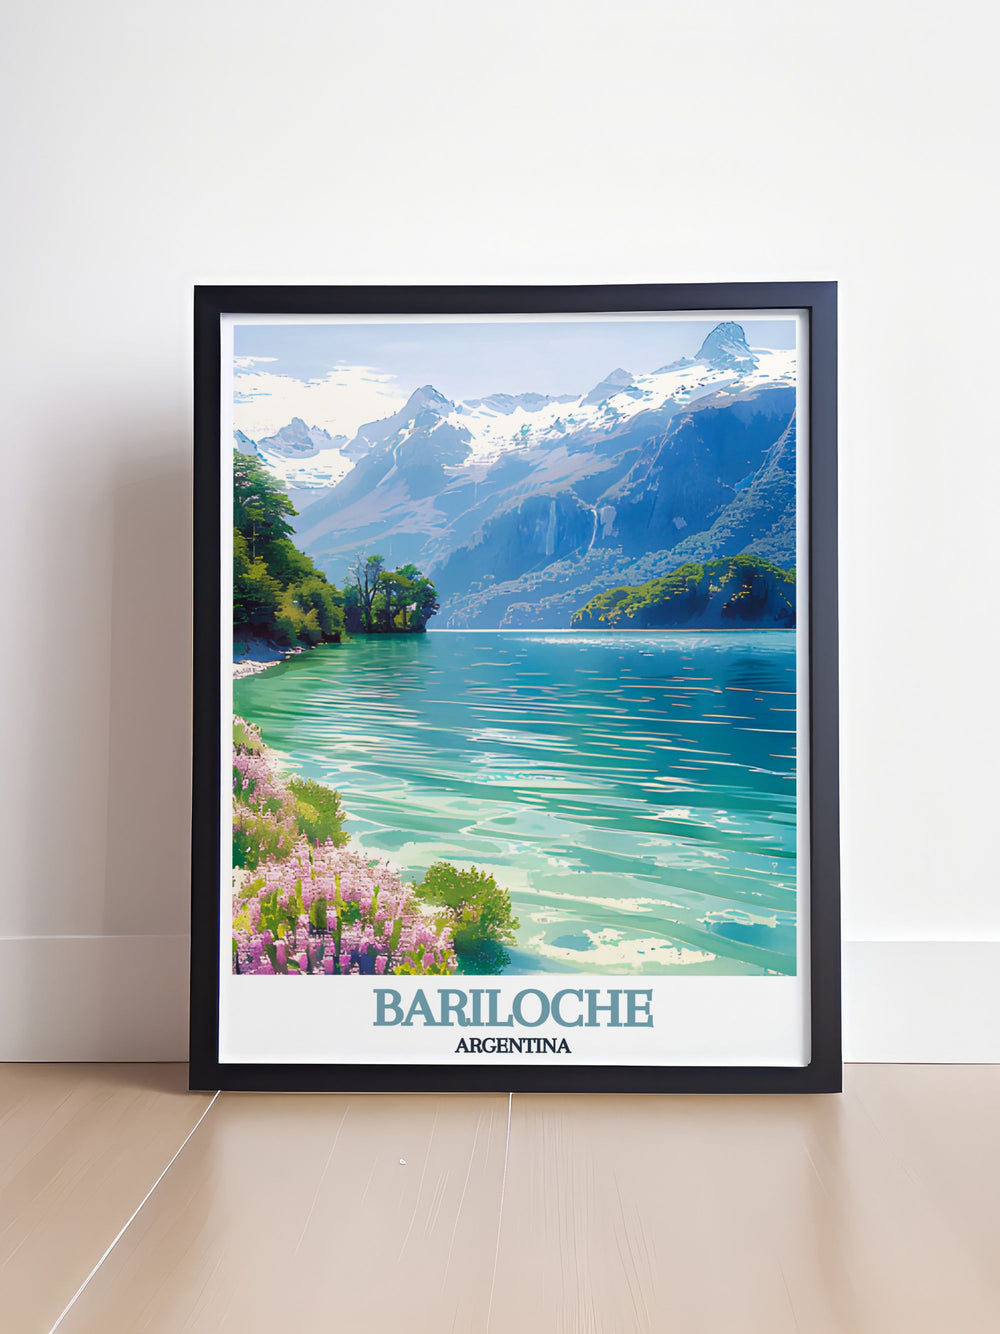 Beautiful Argentina print showcasing San Carlos de Bariloches Nahuel Huapi Lake, highlighting its crystal clear waters and the majestic Andes. Ideal for those who love travel art and adding a scenic touch to their living space.